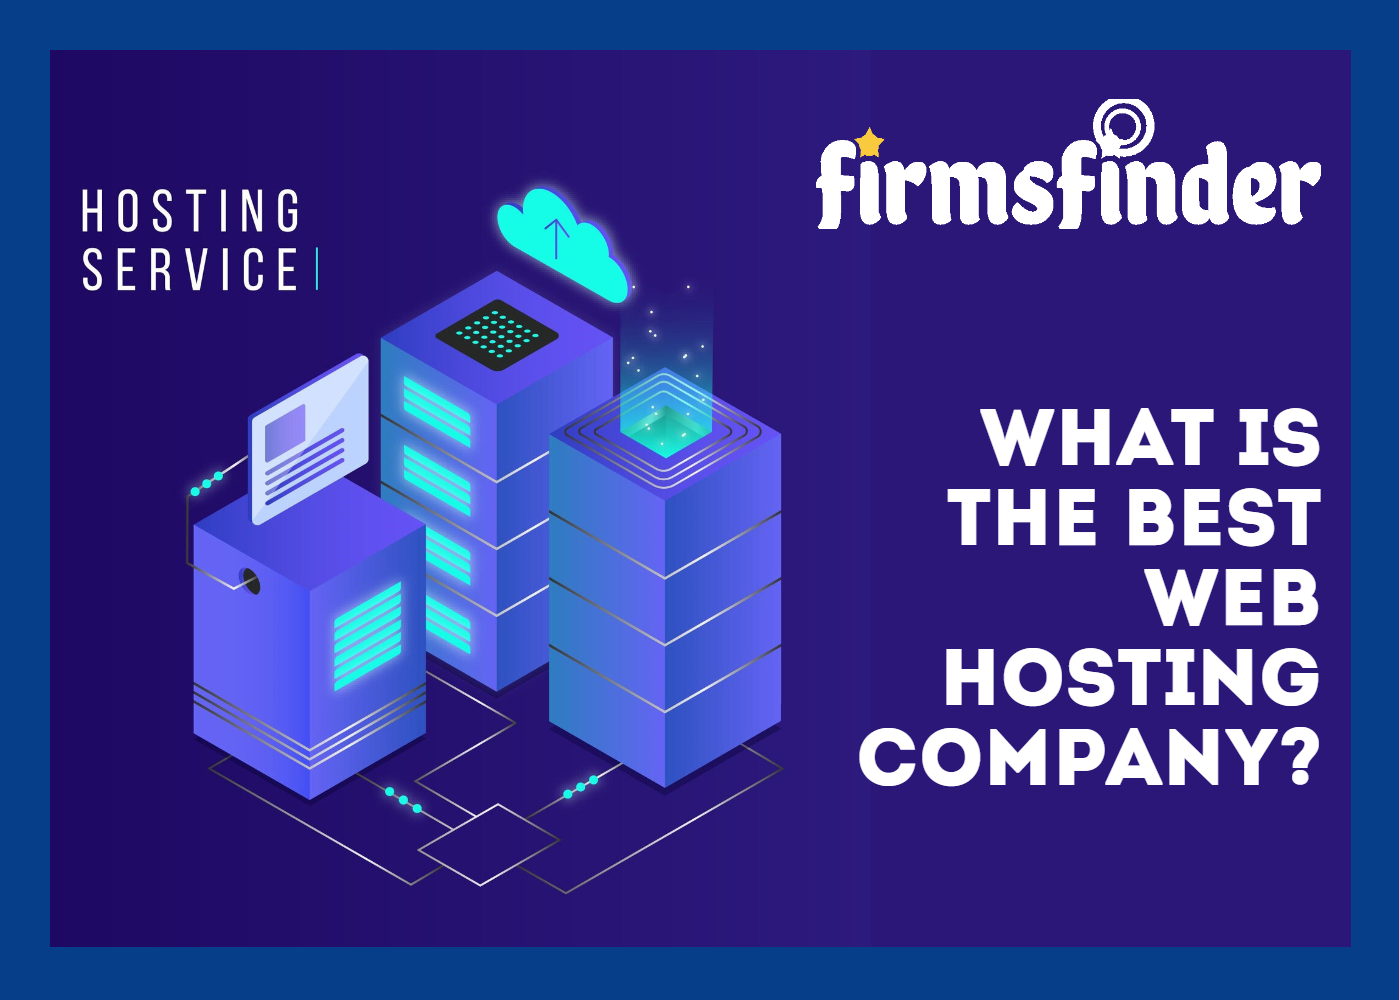 What Is The Best Web Hosting Company?